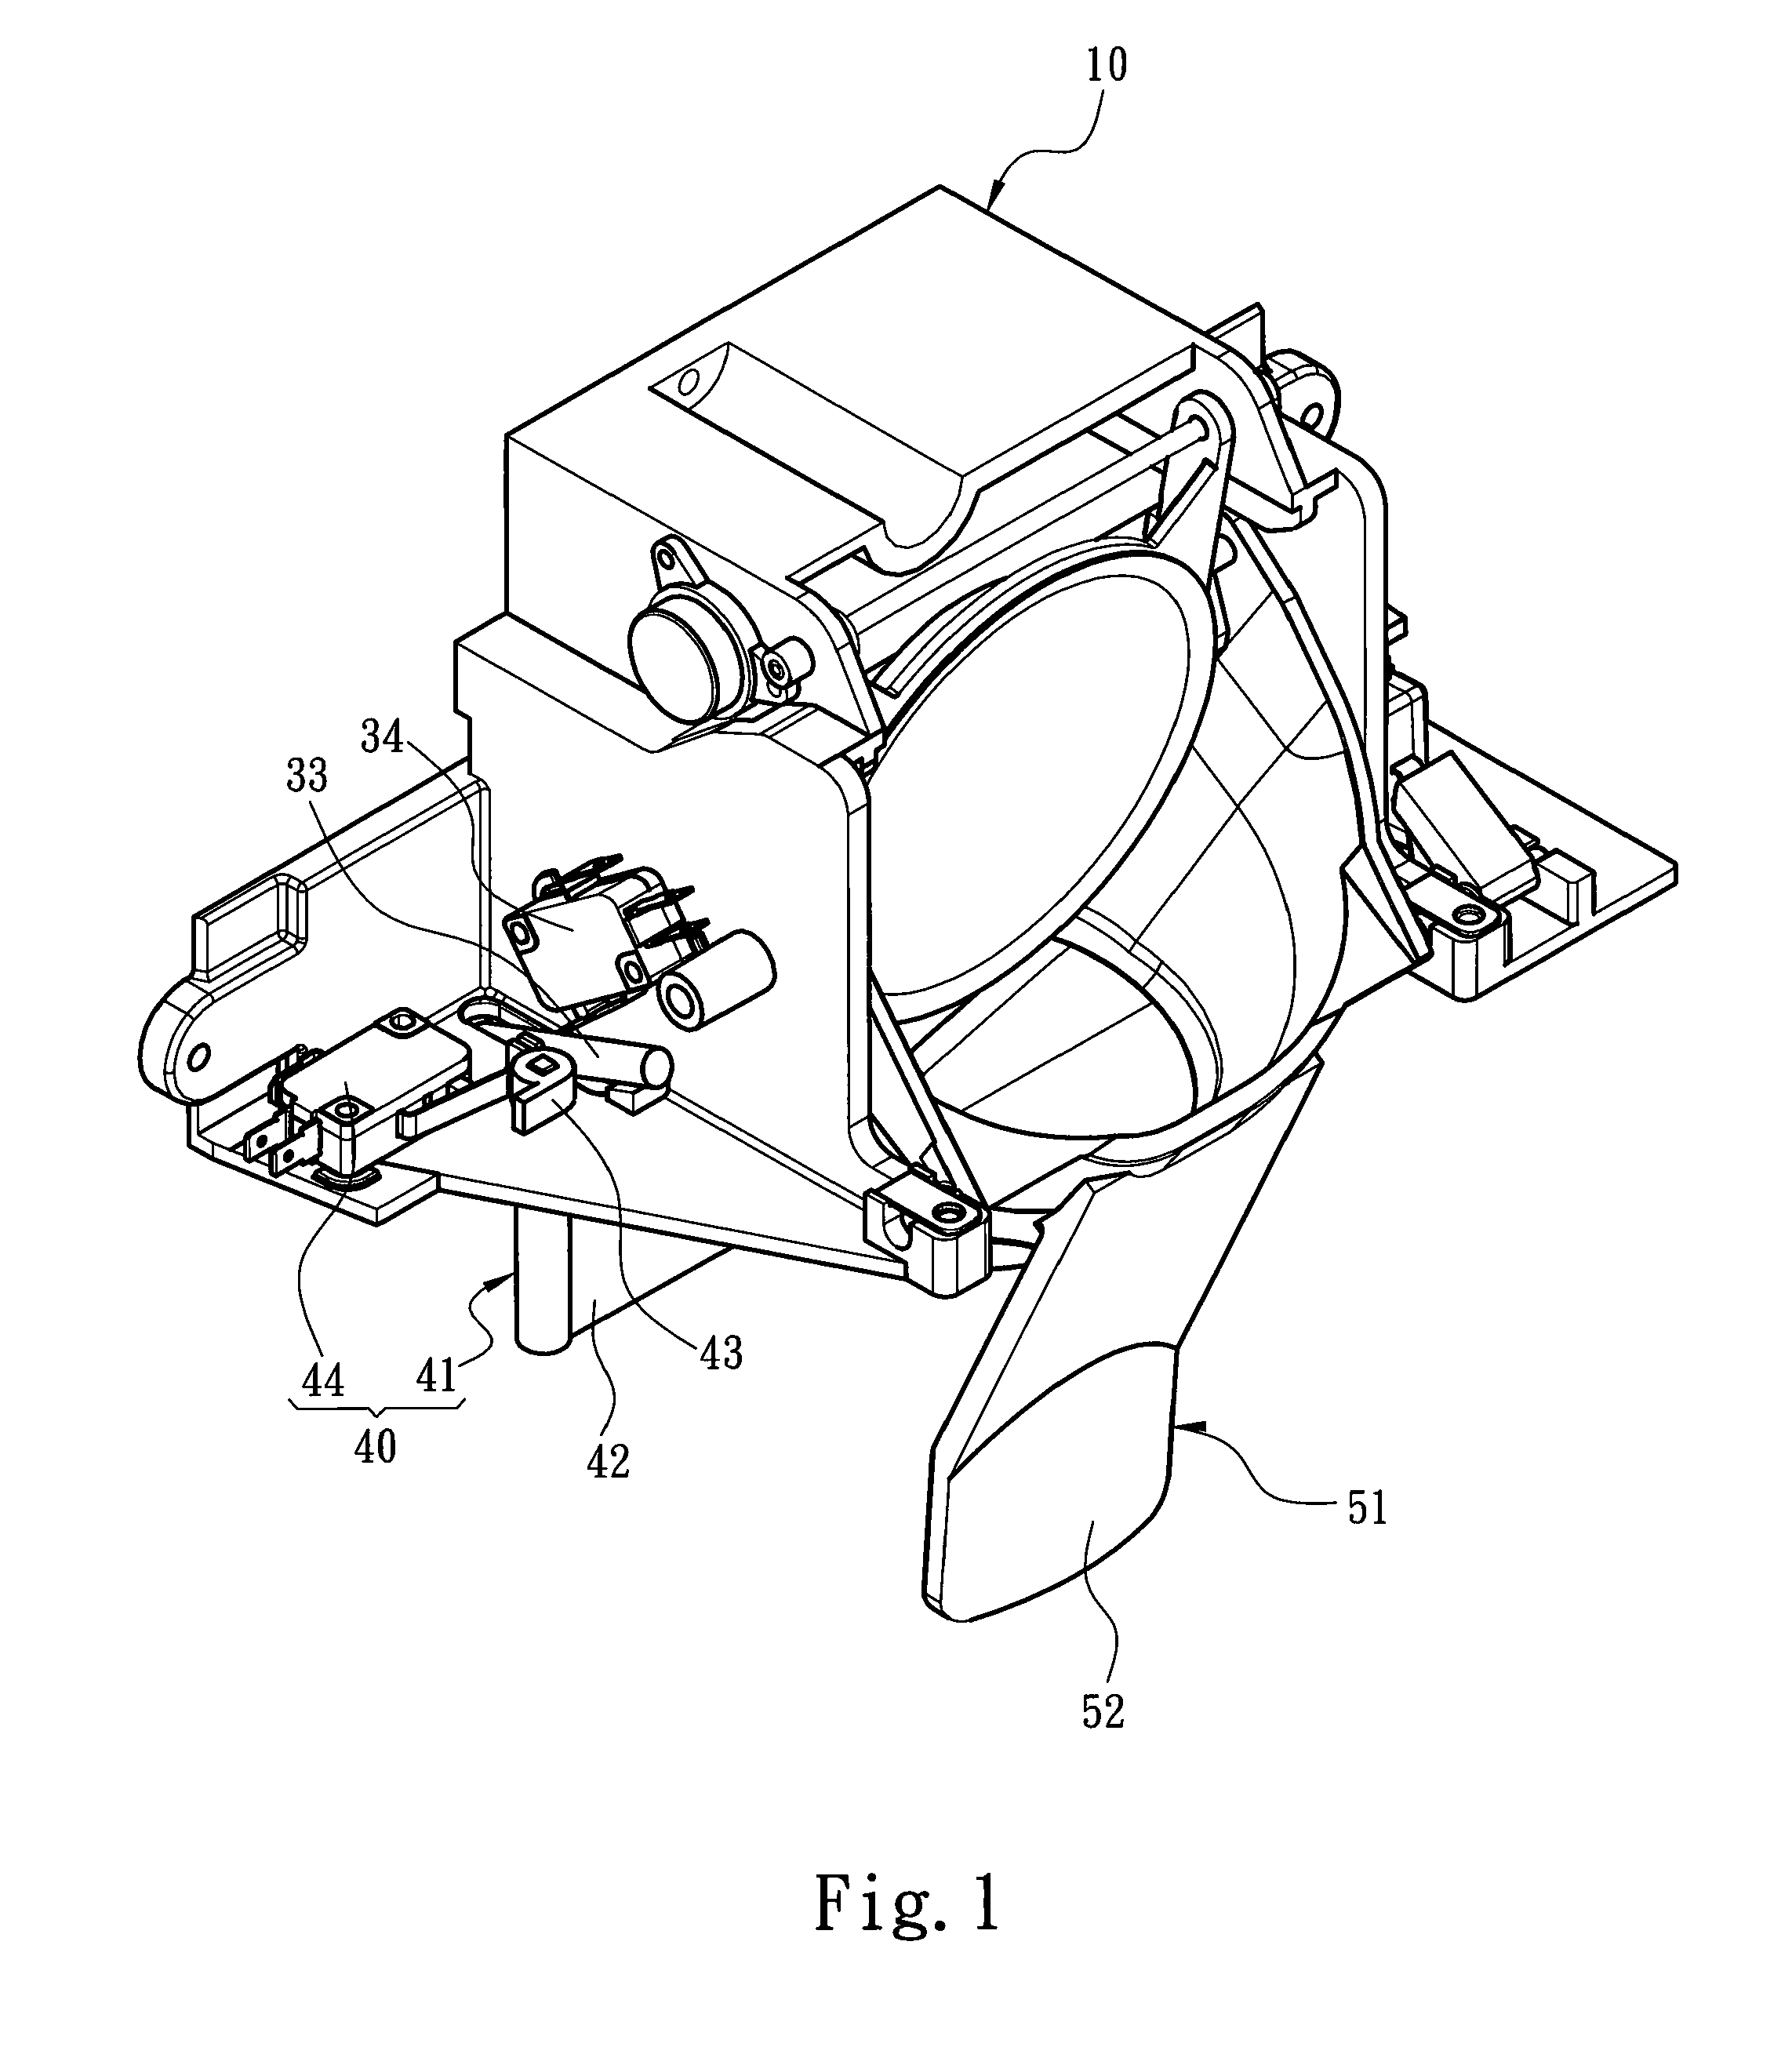 Dispensing control device for icemaker